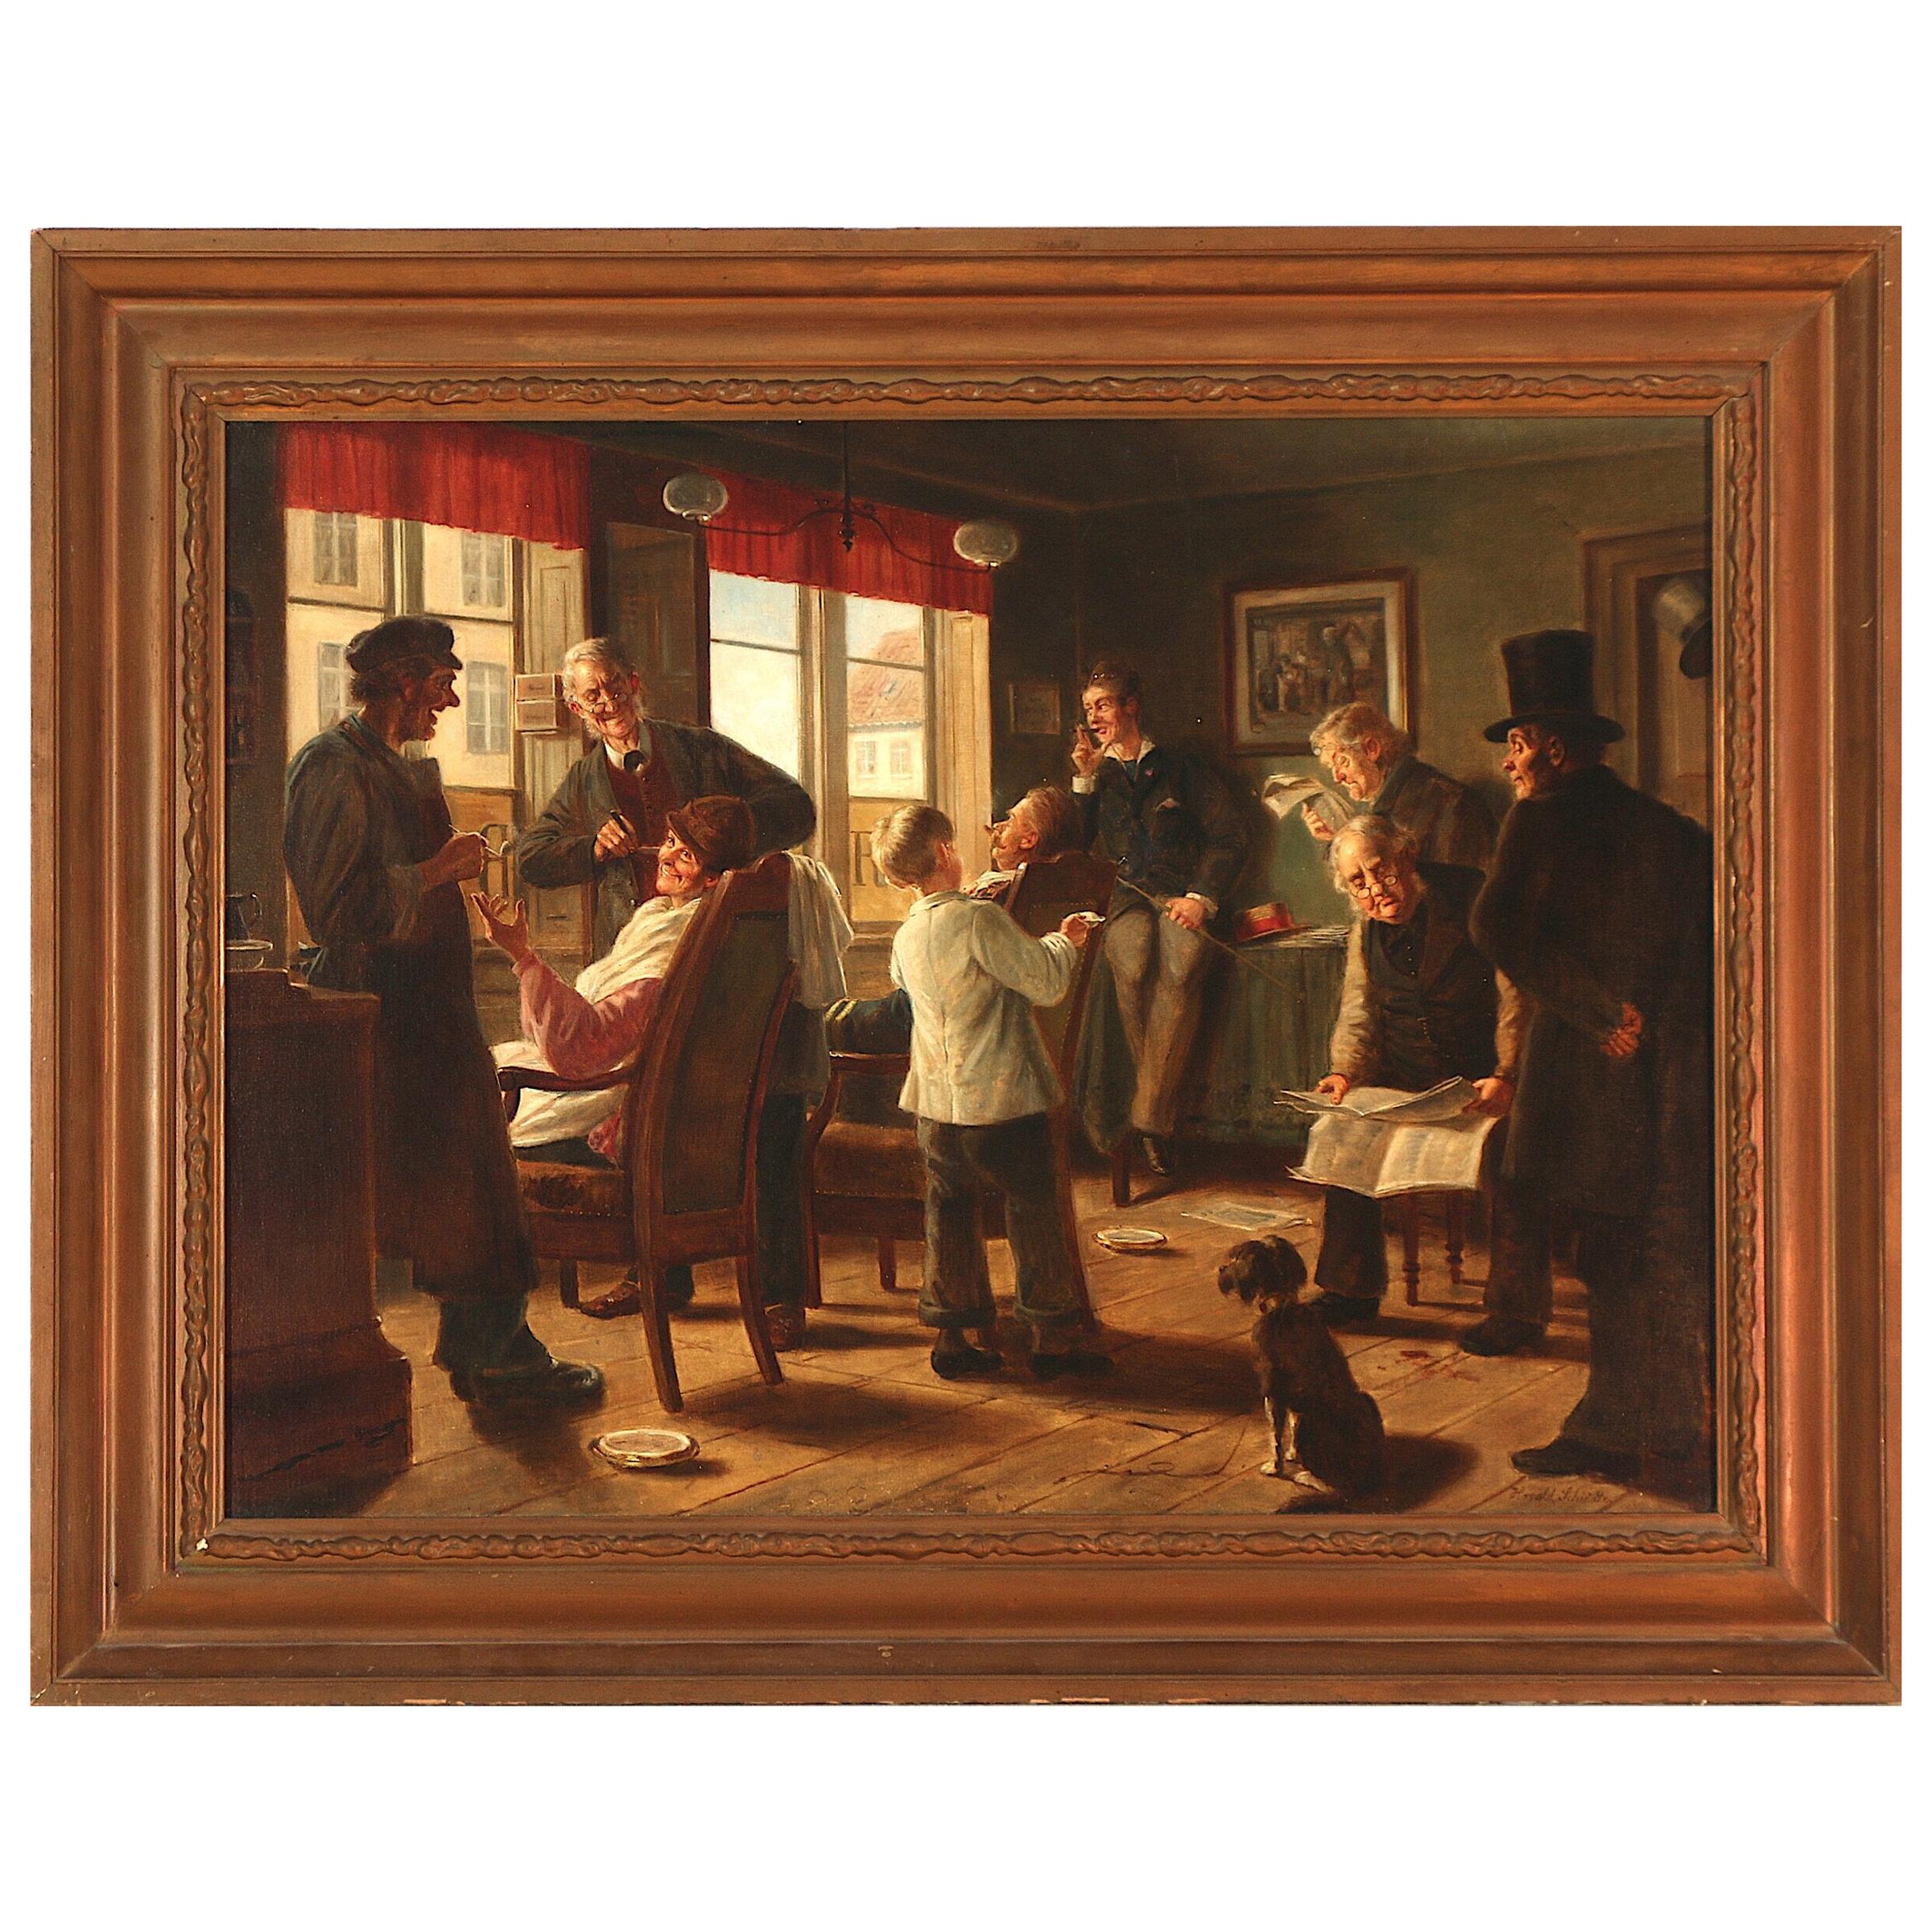 At the Barber Painting by Harald Schiødte